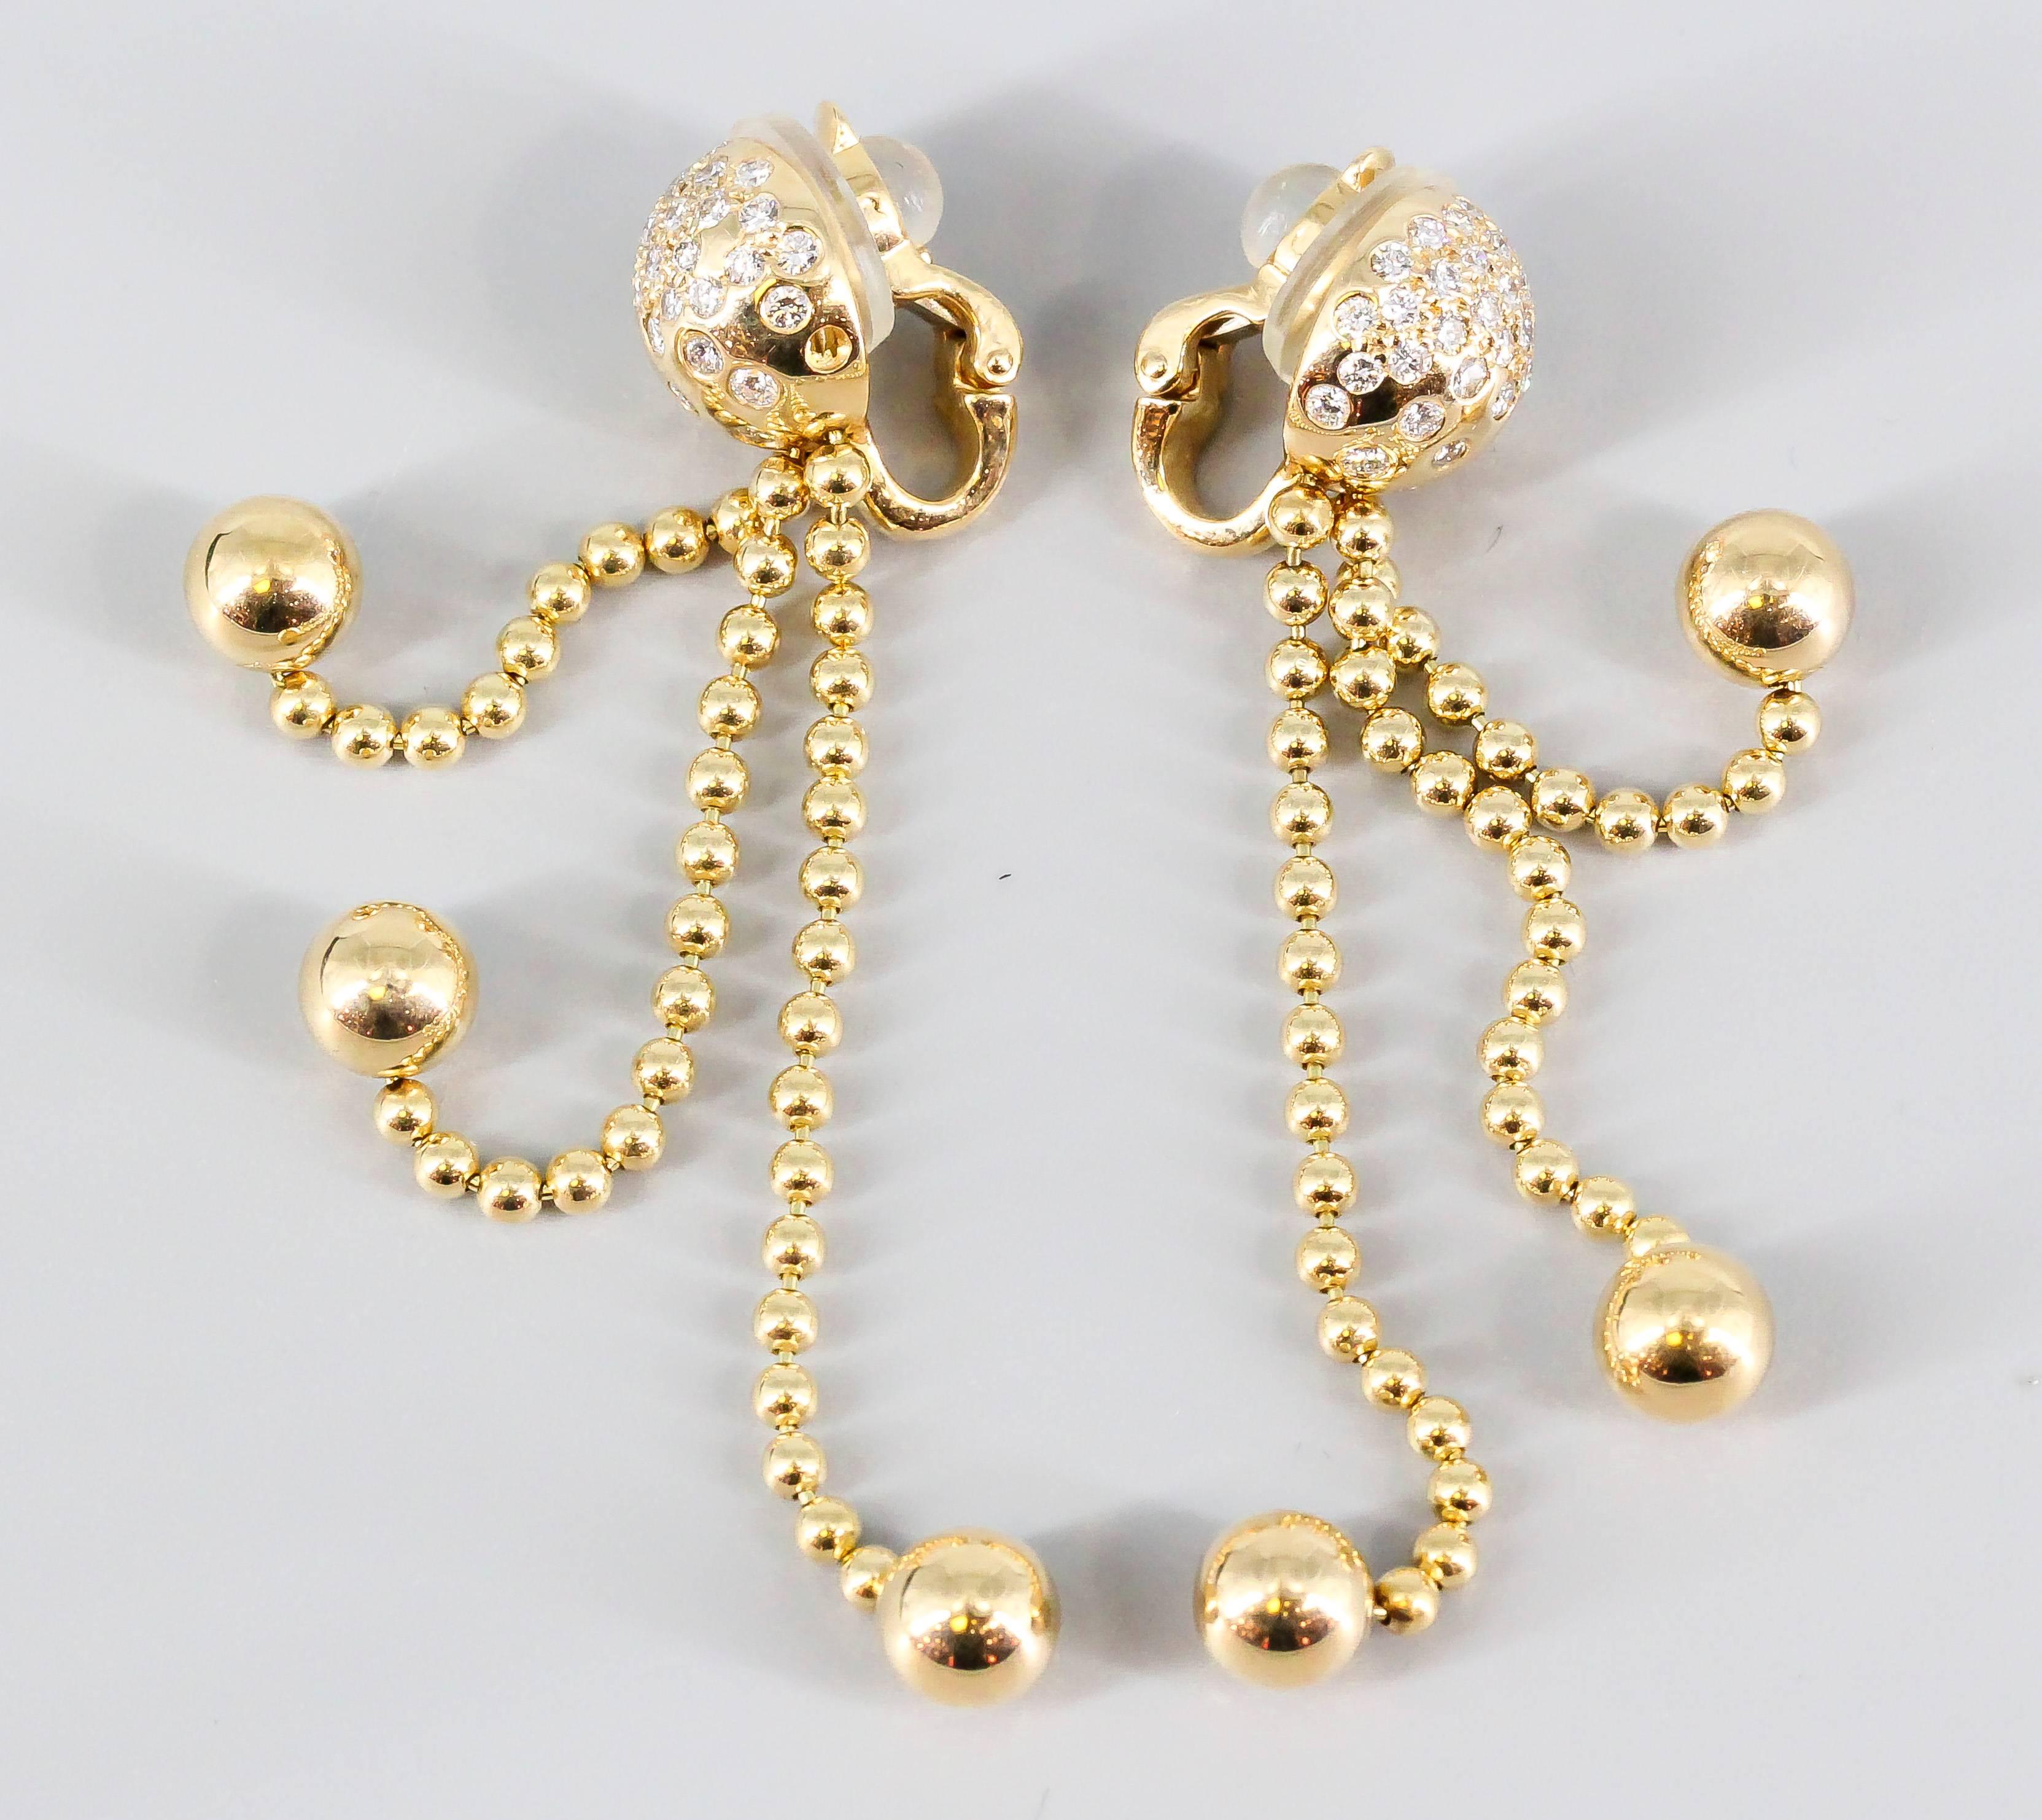 Elegant diamond and 18K yellow gold chandelier earrings from the 